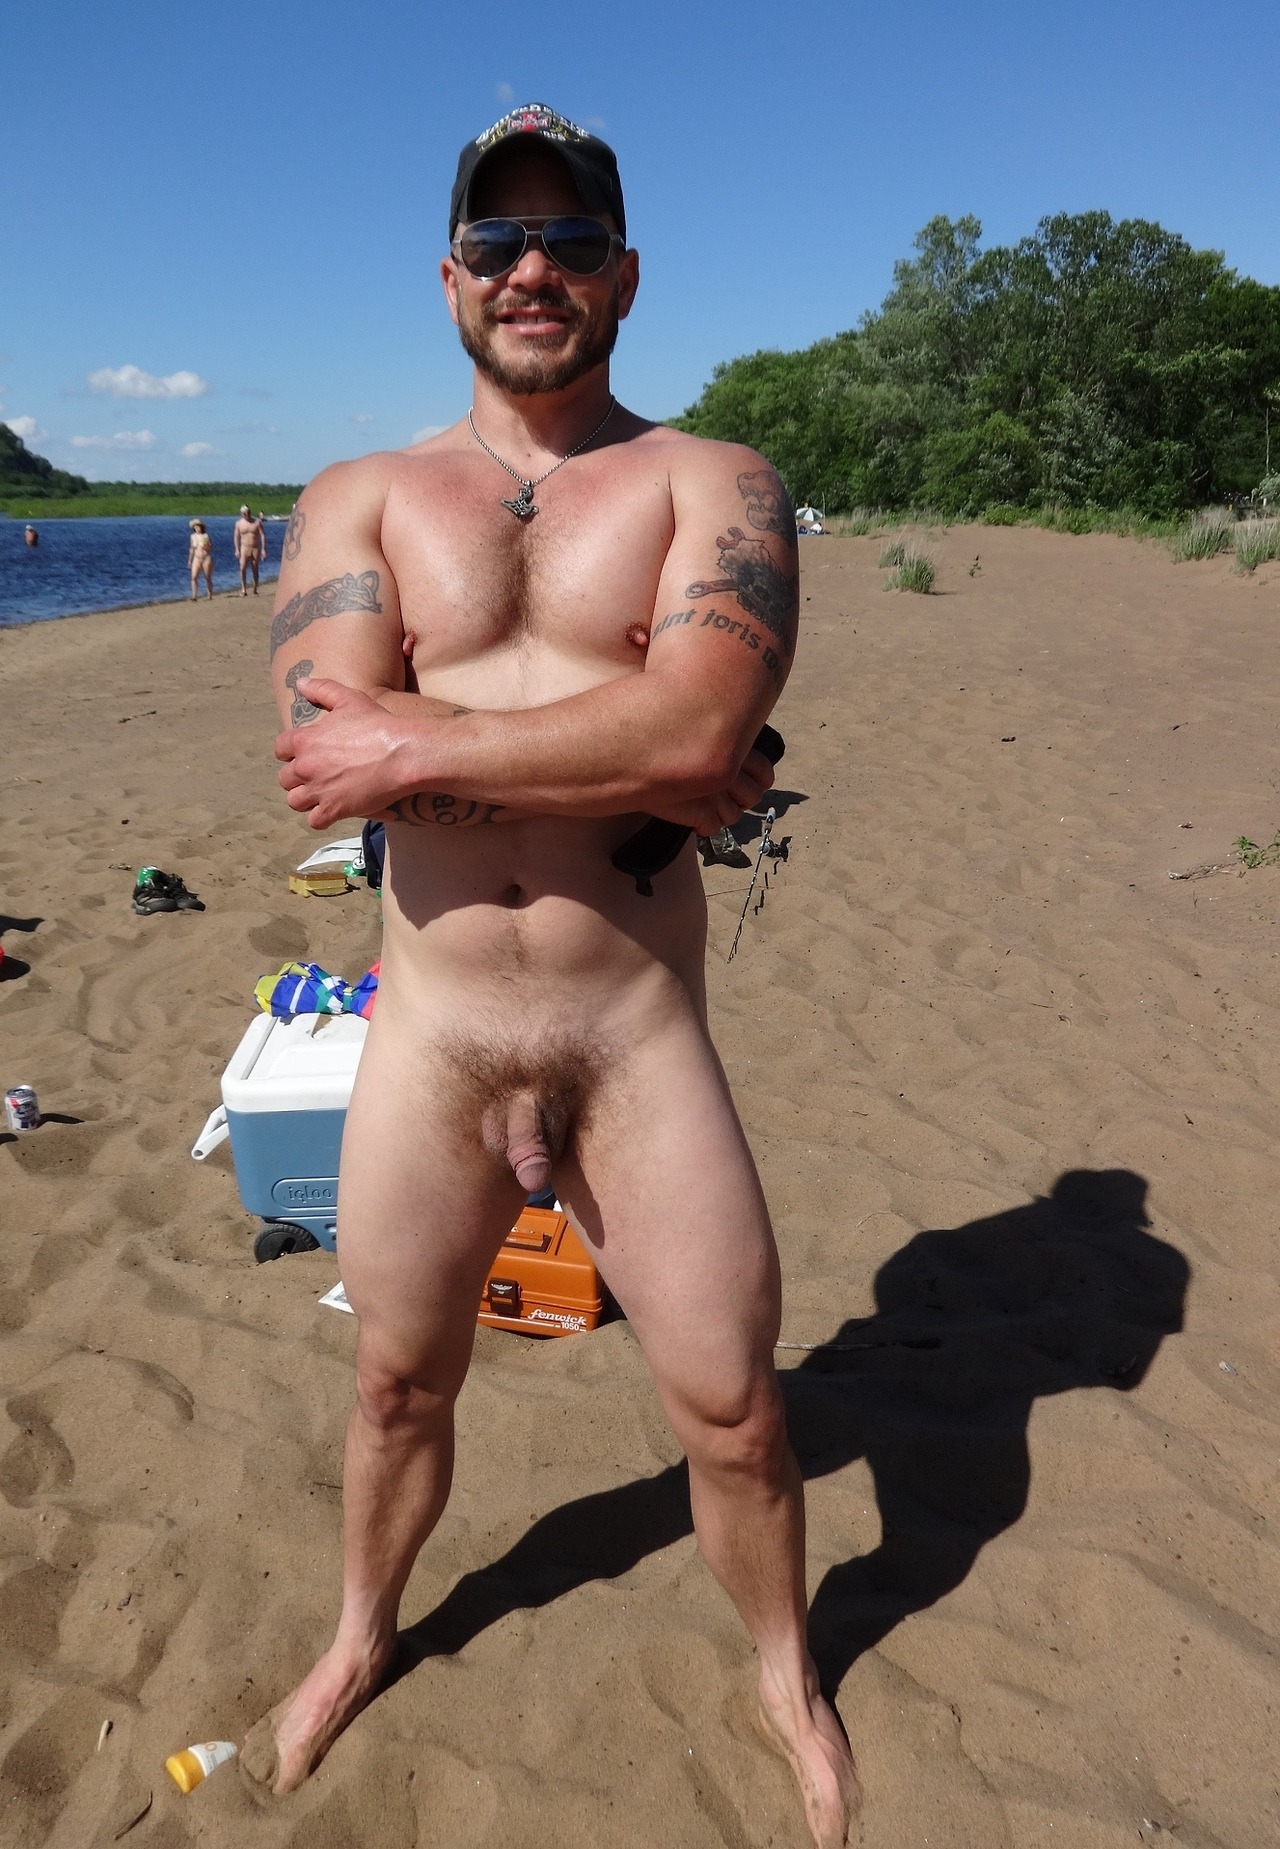 male-nudists-and-naturists:
“Main blogs: exhibitionisten-exhibitionists | nudists-and-exhibitionists
Other blogs: male-nudists-and-naturists | men-nude | guys-posted
I reblogged this post from quiutipay.
”